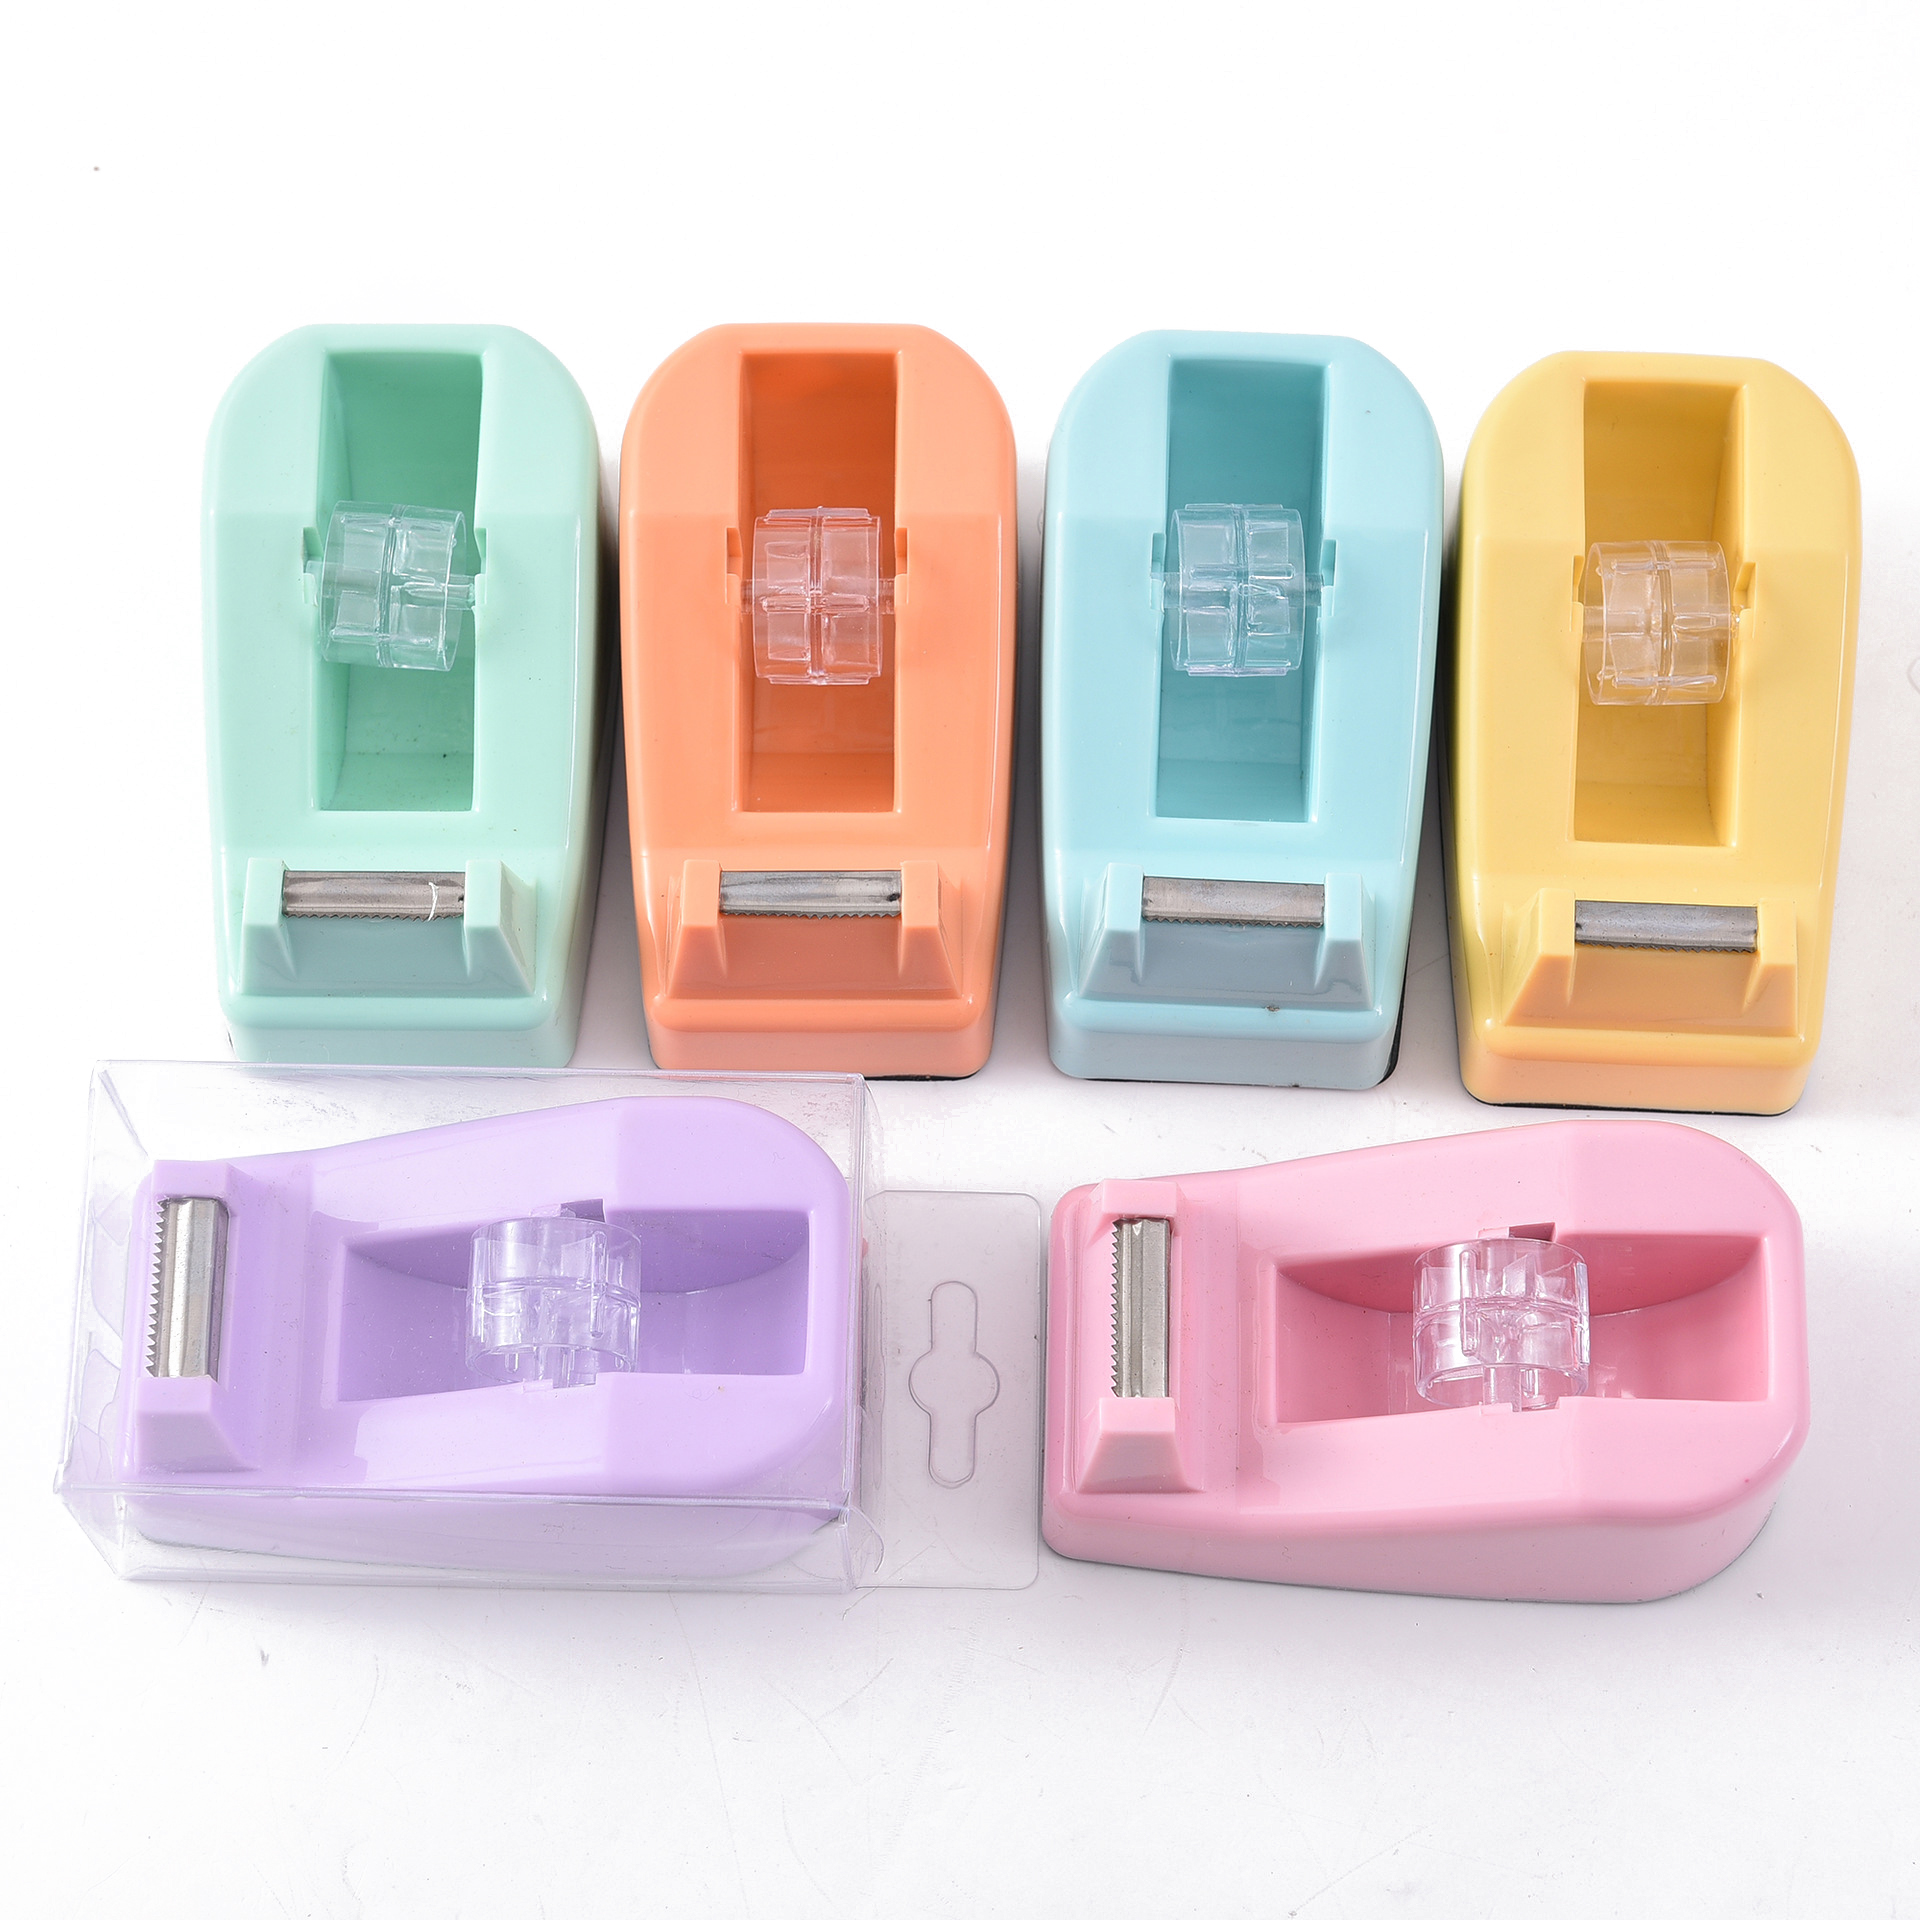 Wholesale Plastic Desktop Personal Use Cute Heat Transfer Tape Cutter Dispenser With Tape Cutter Featured Image